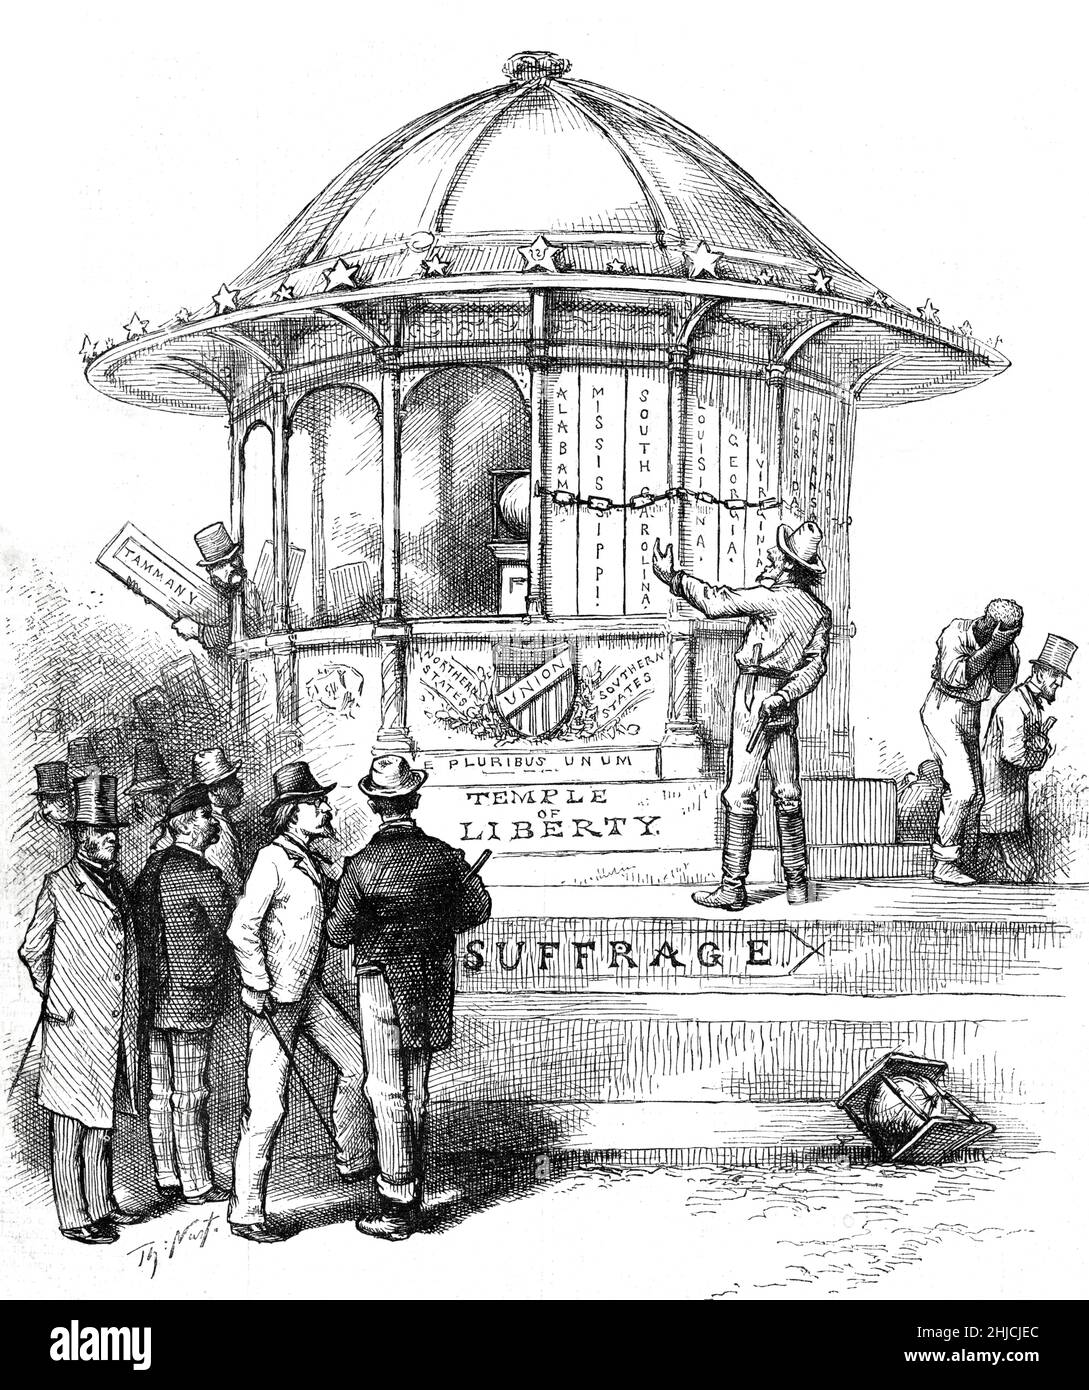 Illustration showing the Temple of Liberty boarded up by Southern states to disenfranchise black voters while inviting the North, represented by New York's Tammany Hall, to do the same. Thomas Nast (1840-1902), 1880. Stock Photo